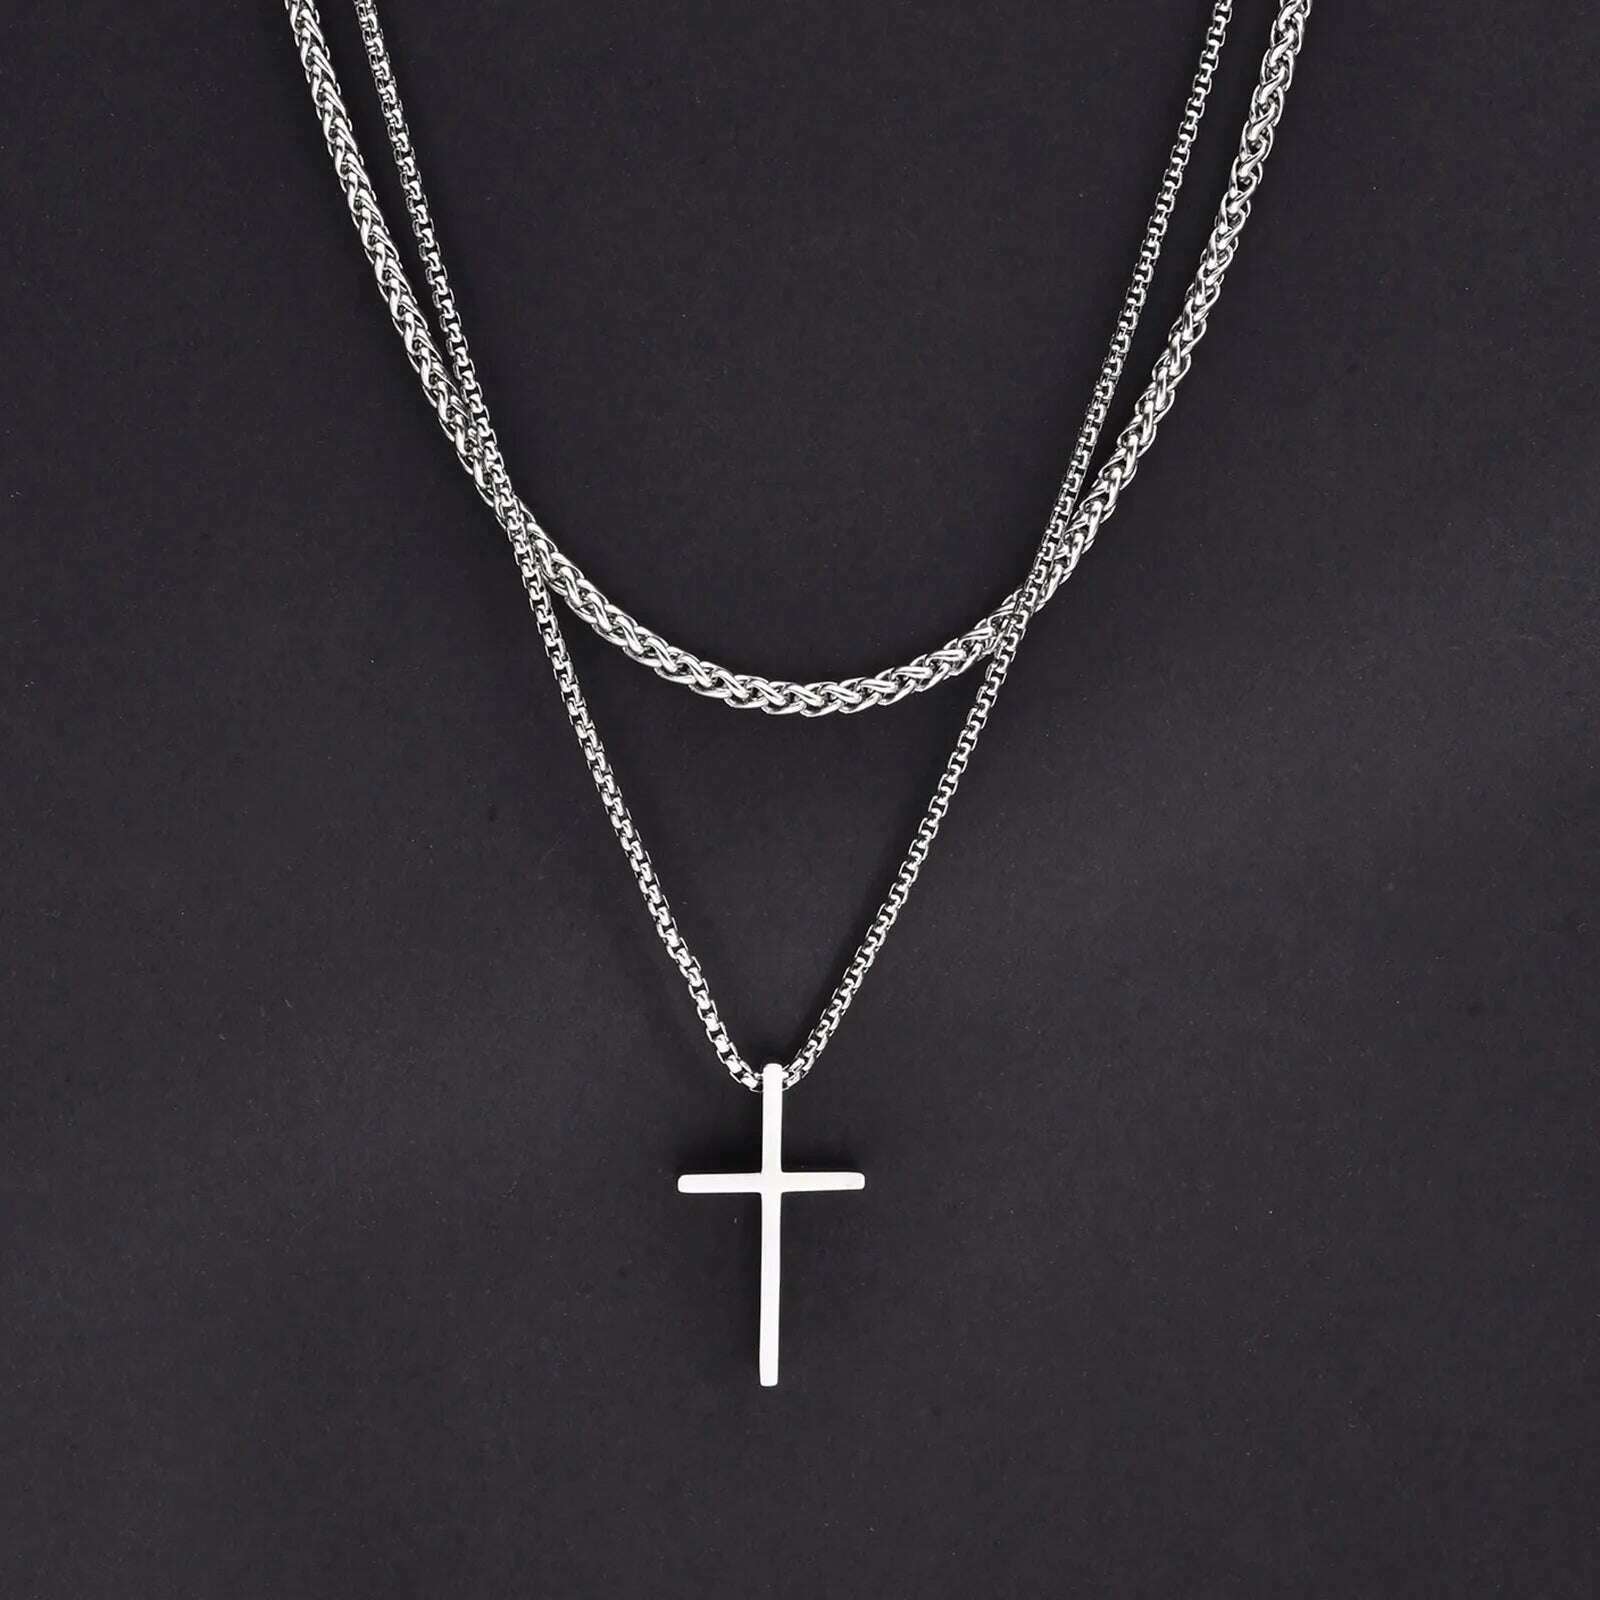 KIMLUD, Vnox Mens Cross Necklaces, Stainless Steel Layered Plain Cross Pendant, Rope Box Chain Necklace, Simple Prayer Jesus Collar, NC-1035S NC-104-50S, KIMLUD Women's Clothes